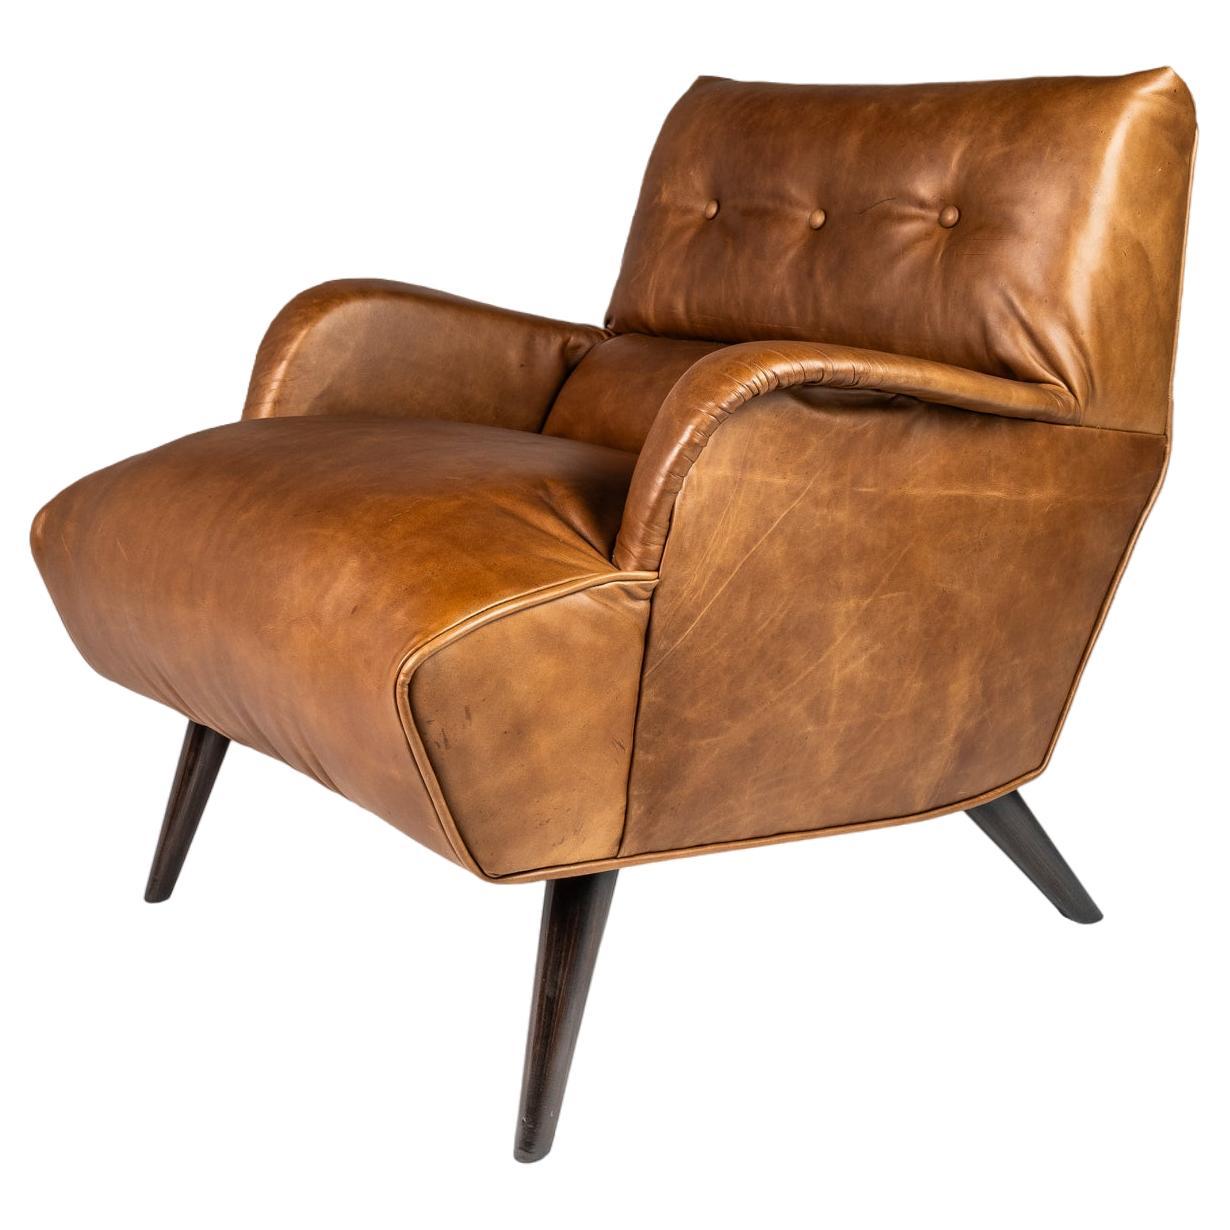 Low Profile Lounge Chair in Leather Attributed to Carlo de Carli, Italy, 1960's For Sale